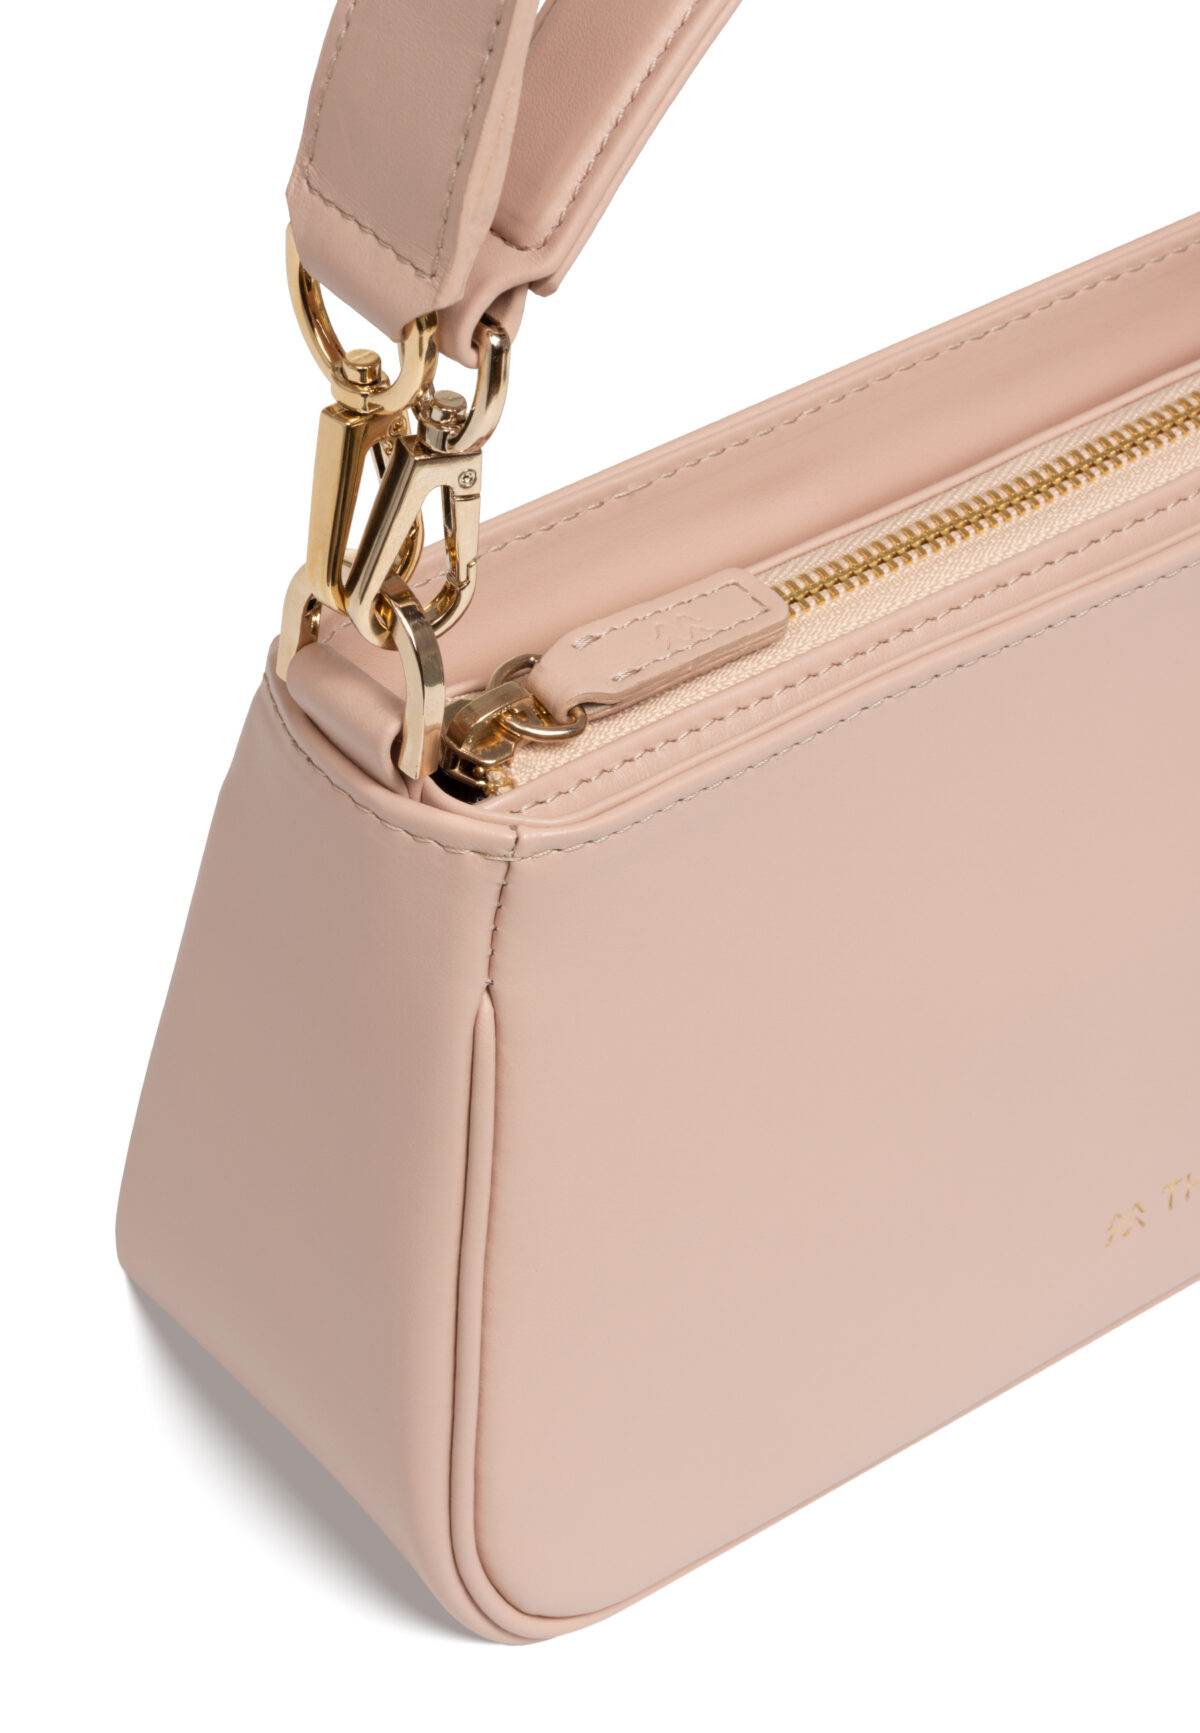 BELLONA BAG NUDE OUTLET